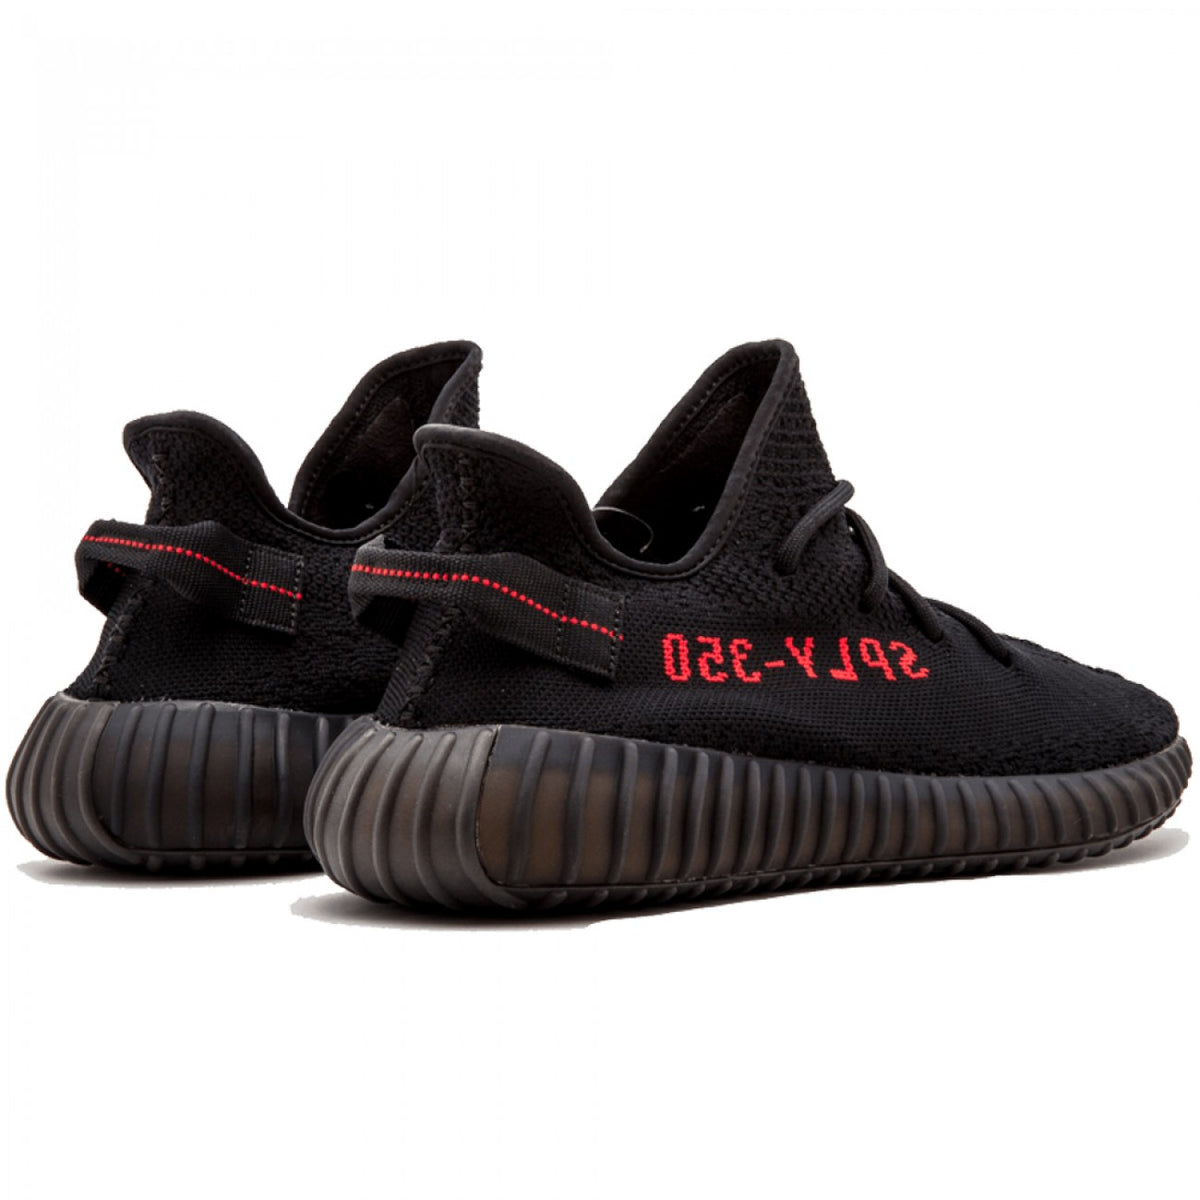 yeezy boost core black red